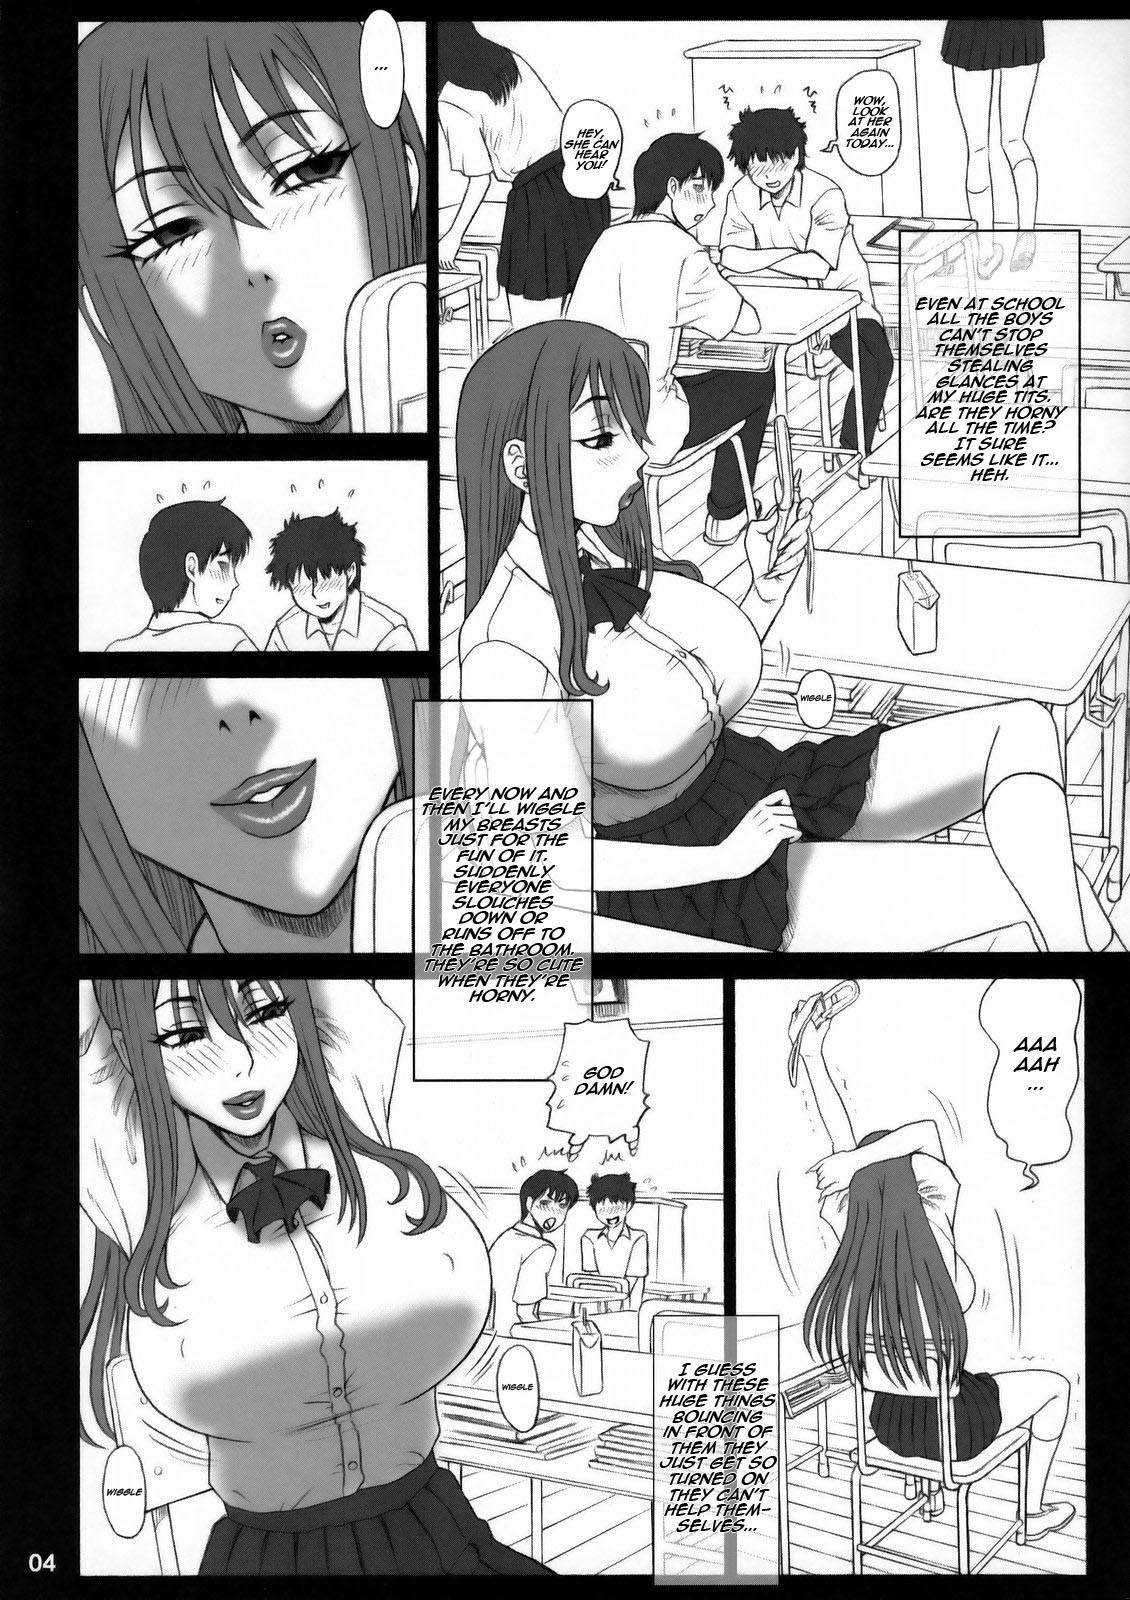 Gaystraight 23 Kaiten ♀ no Ana - Bitch Hole Family Roleplay - Page 3